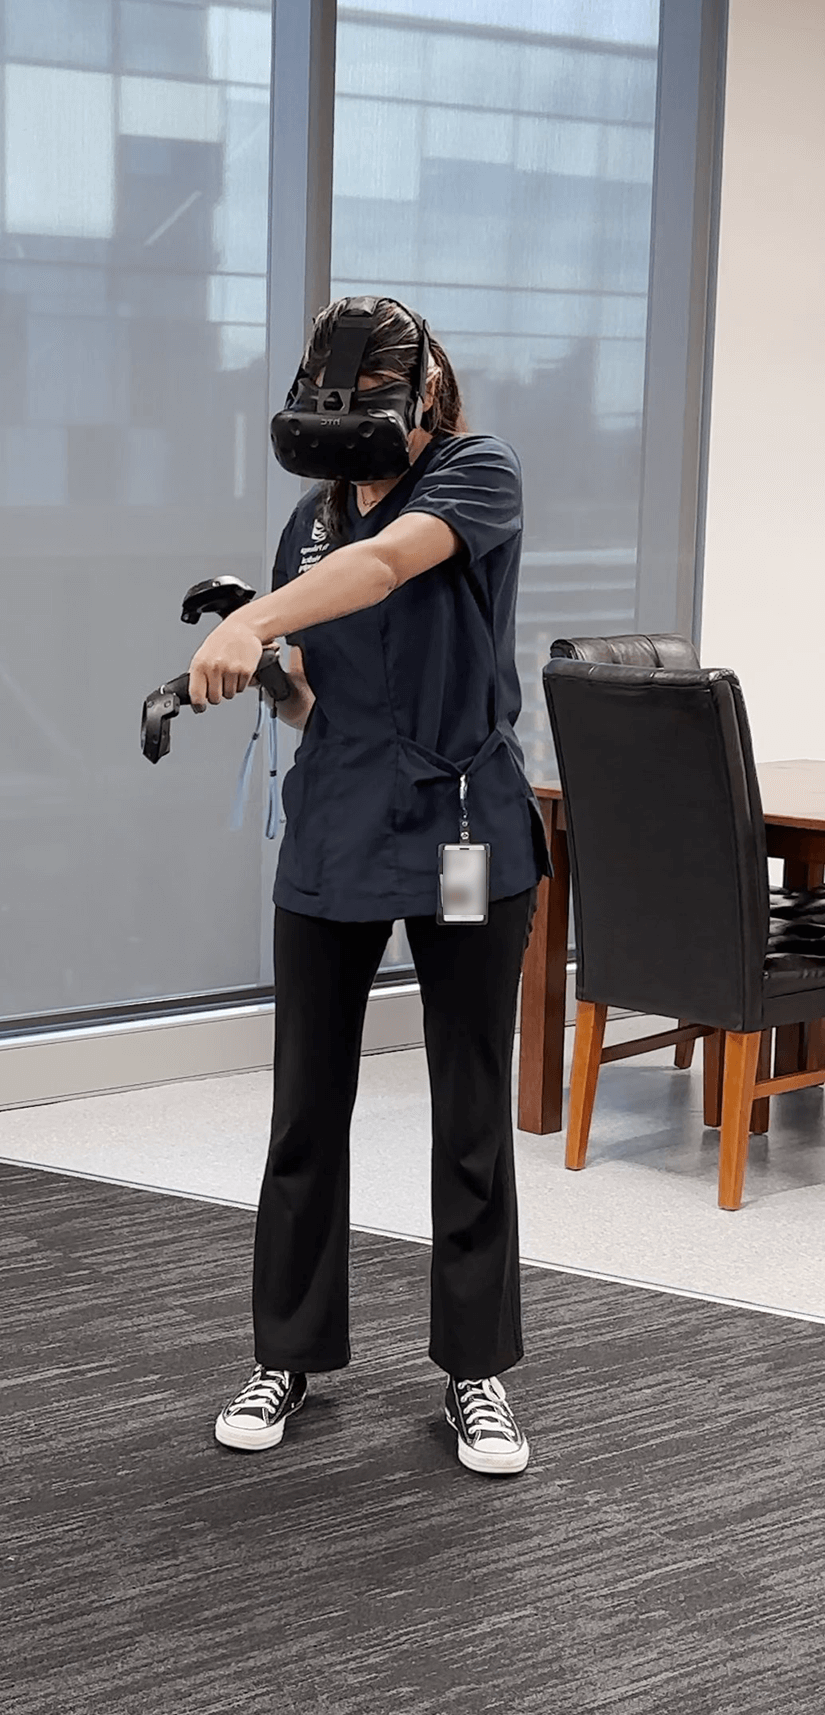 Radiography Student using a Virtual Reality Headset